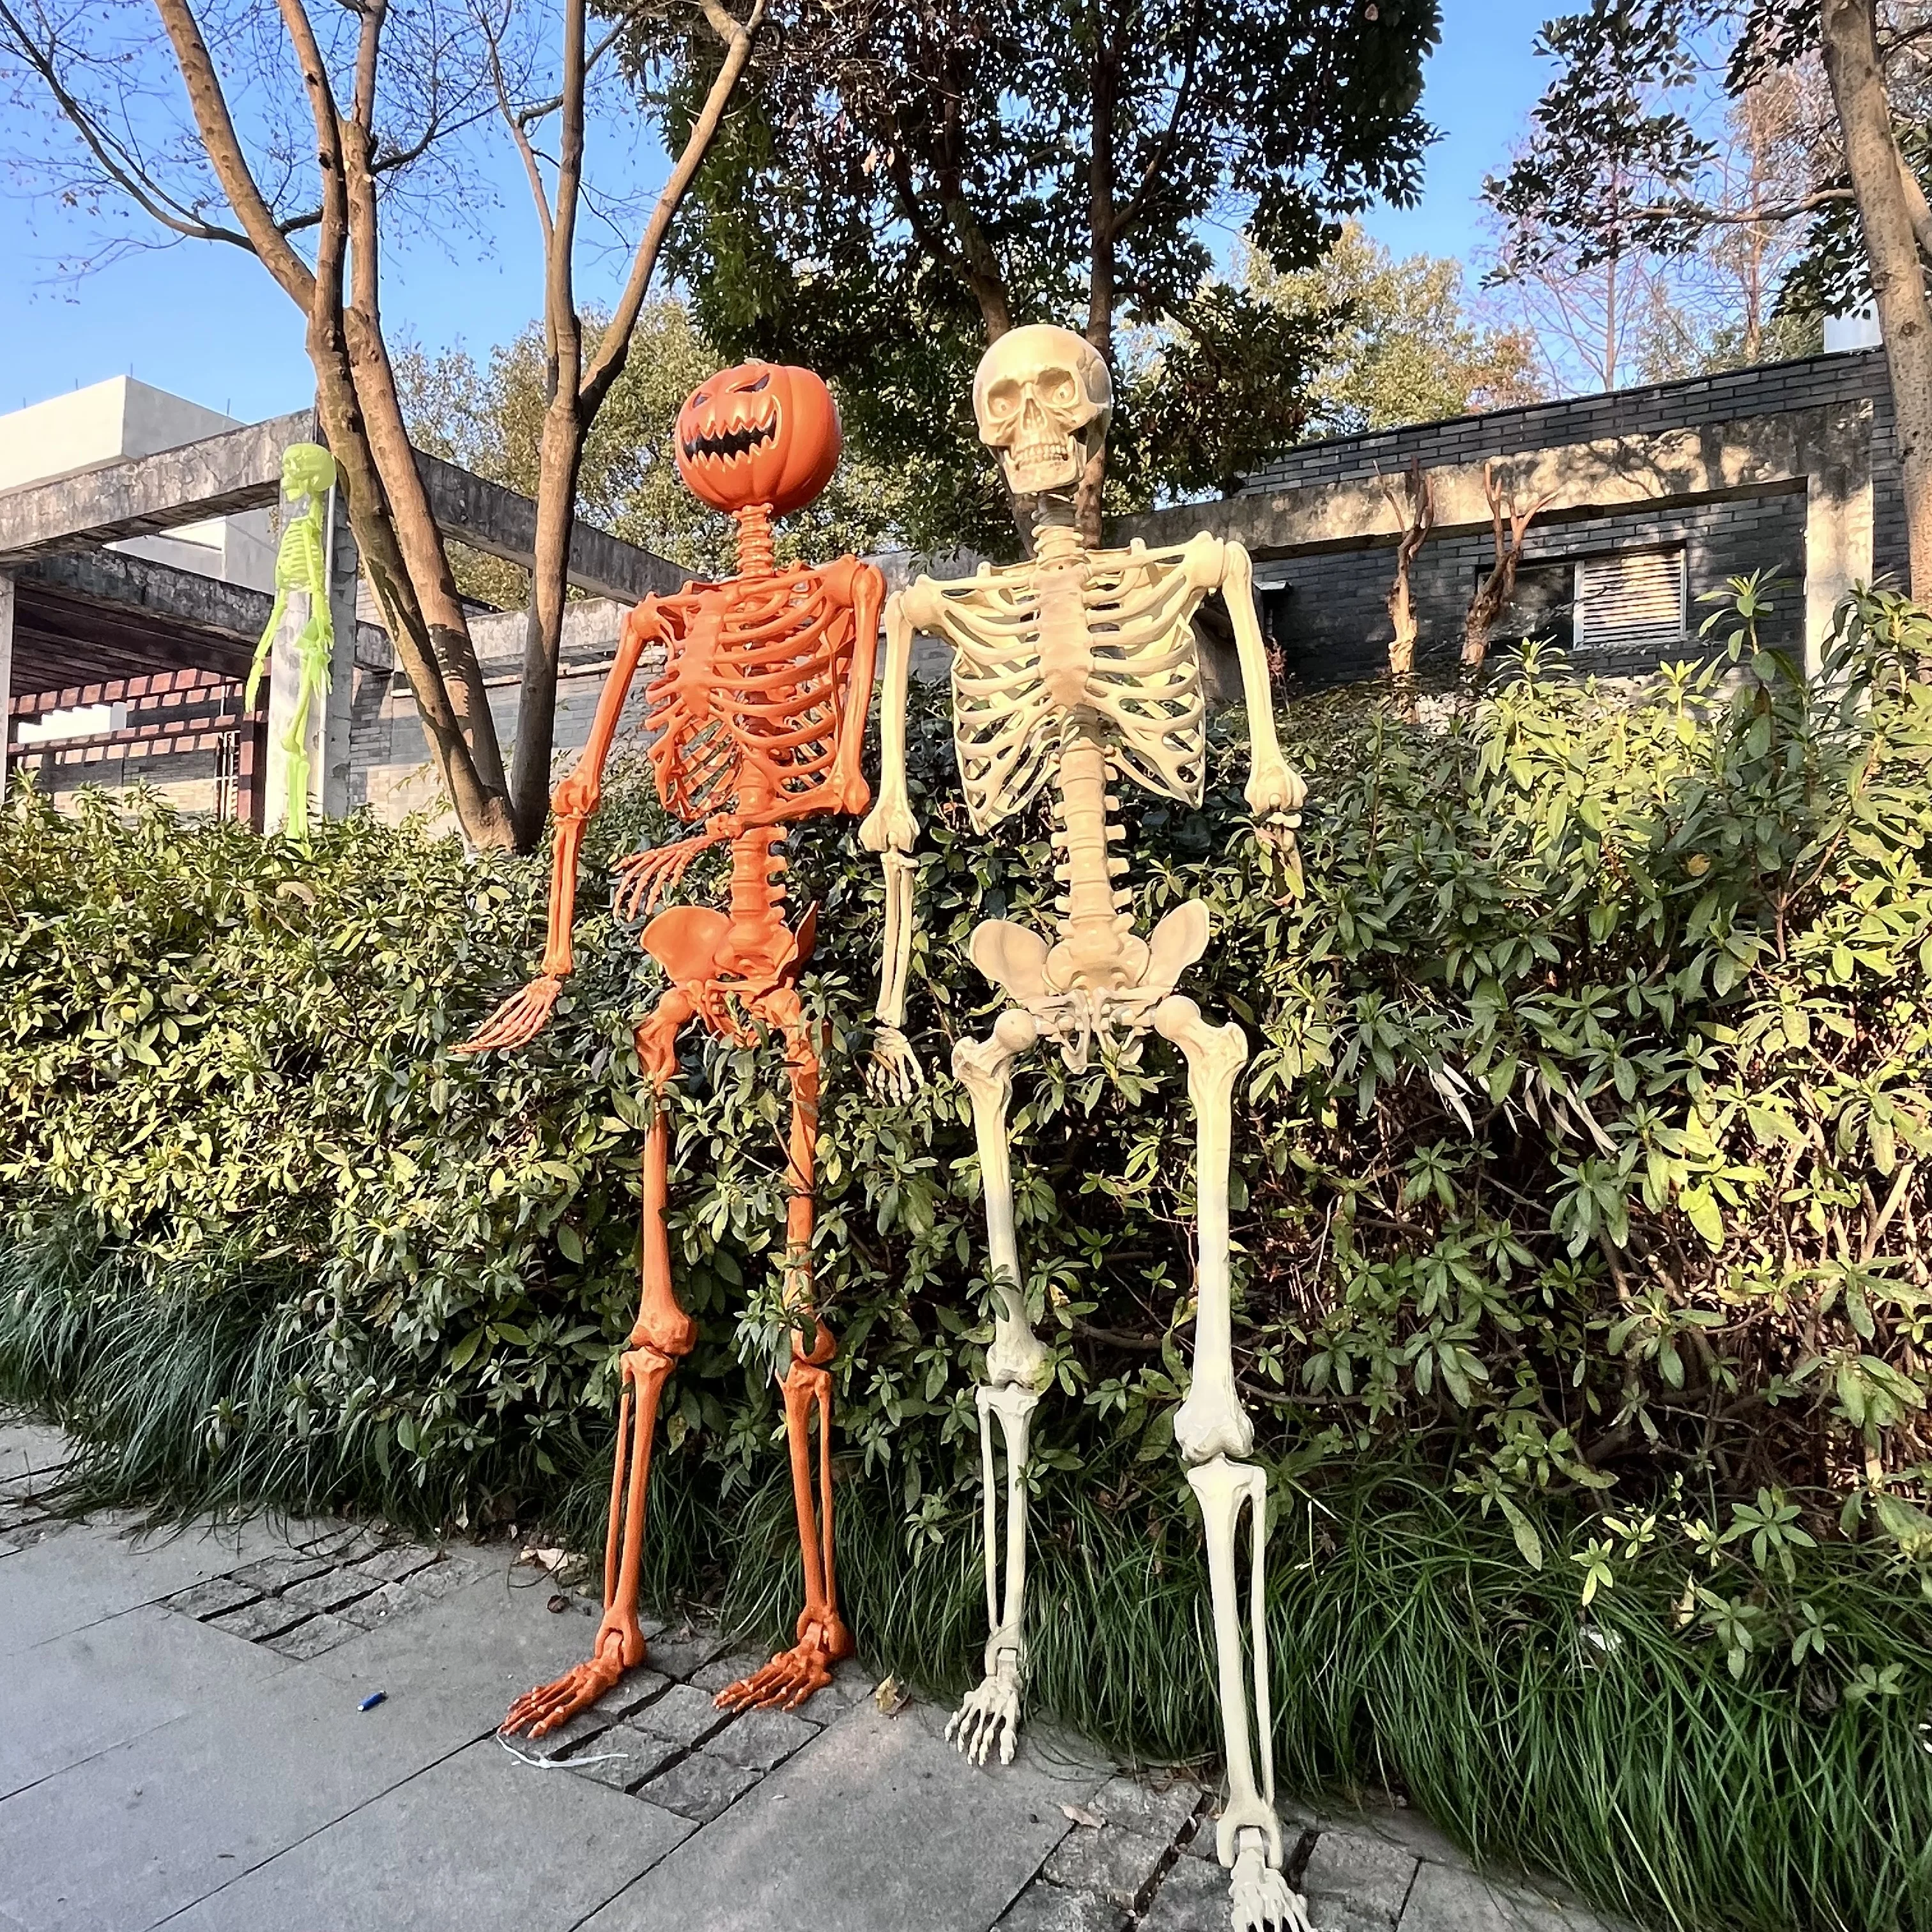 Halloween Supplier Movable 60Inch Realistic Indoor&Outdoor Human Halloween Skeletons For Holidays Decoration